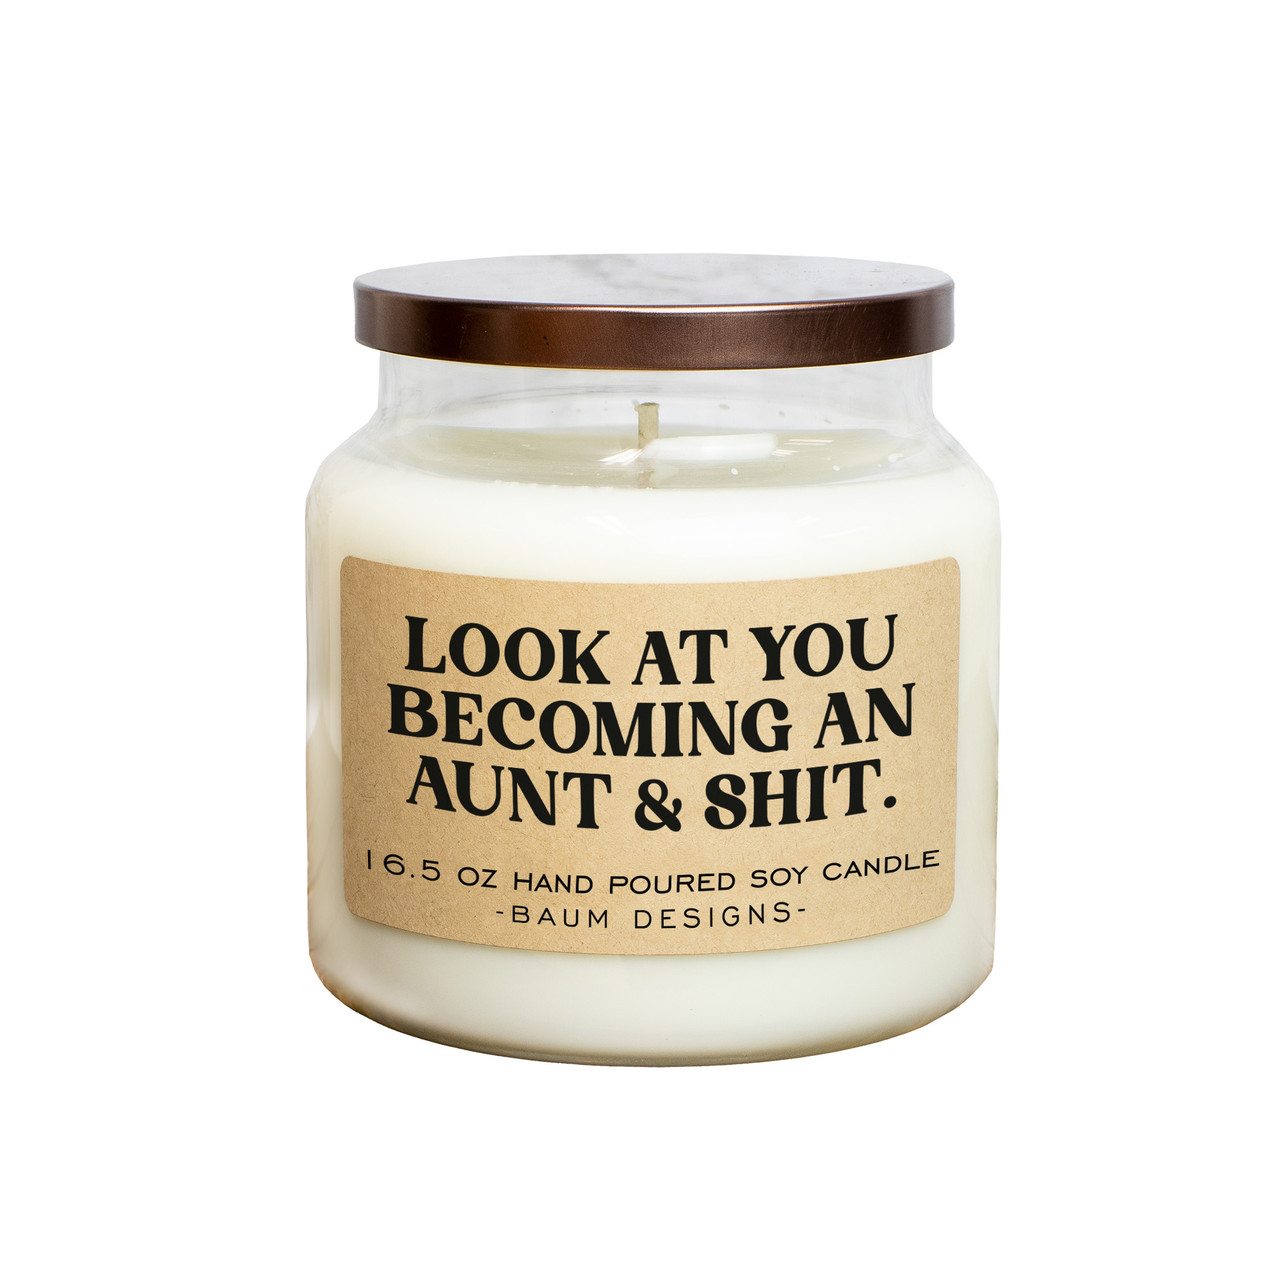 Look At You Becoming An Aunt & Shit Soy Candle Baum Designs